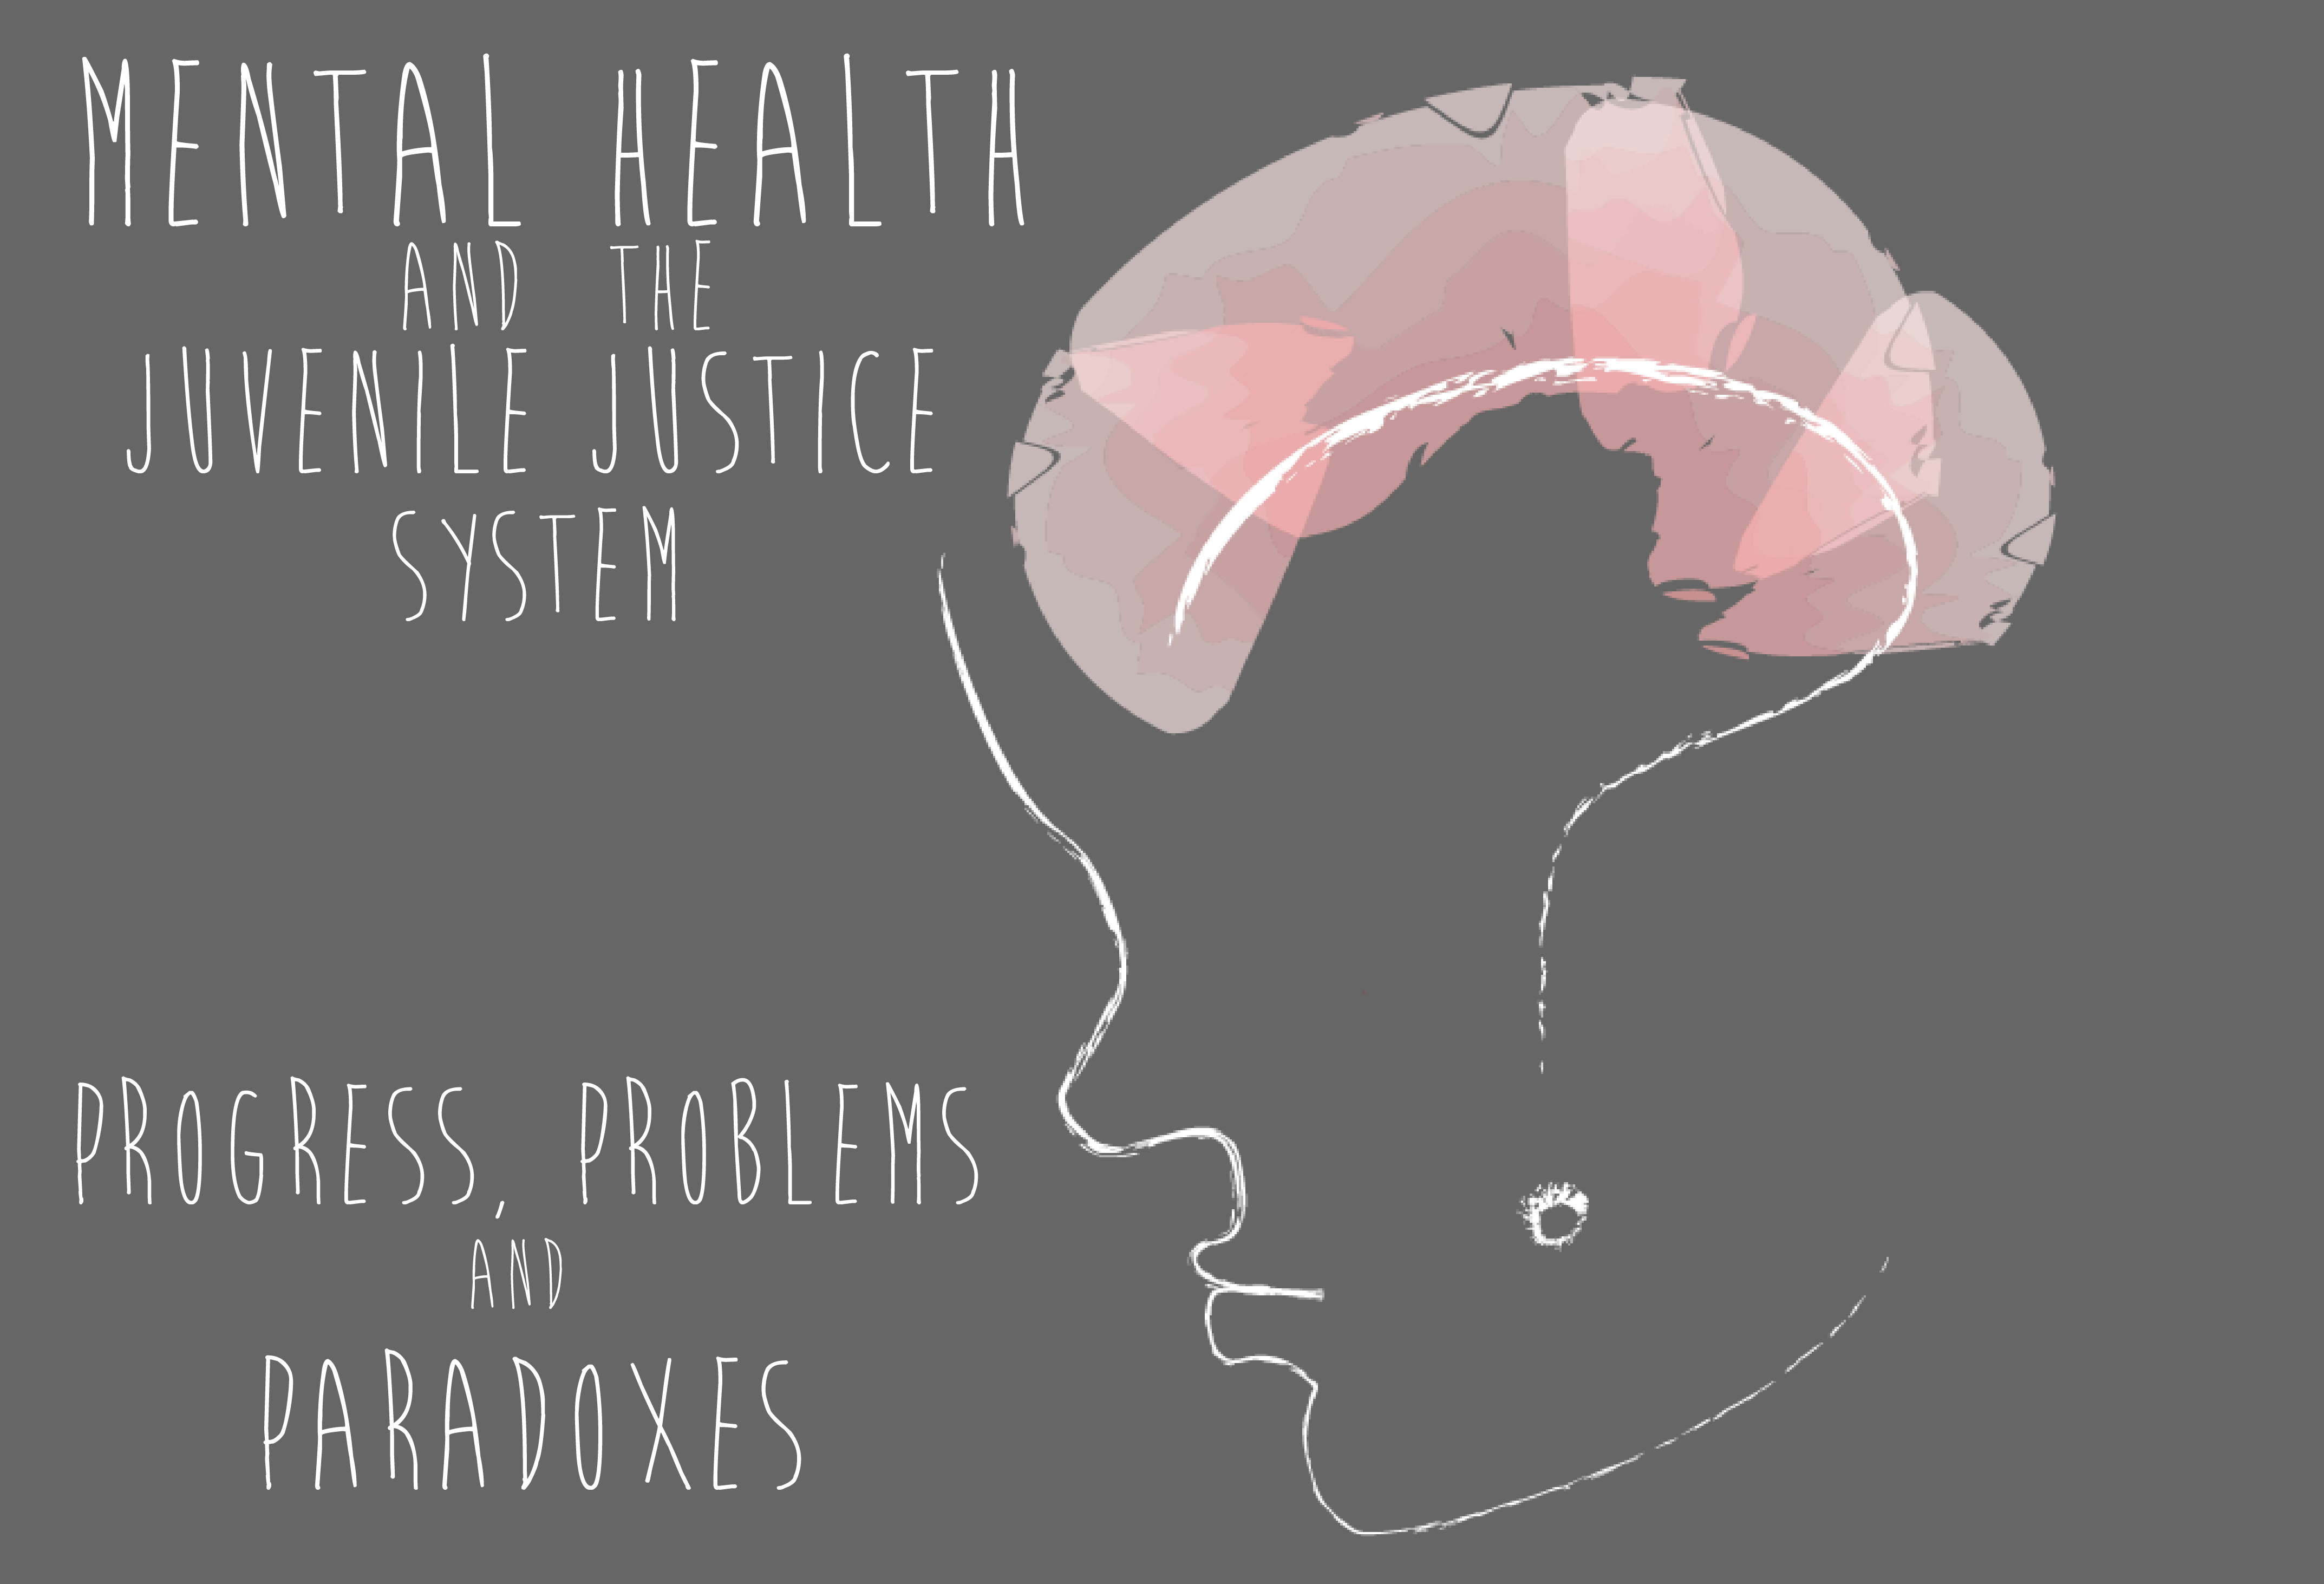 Learn more about mental health and substance abuse at the Juvenile Justice Resource Hub